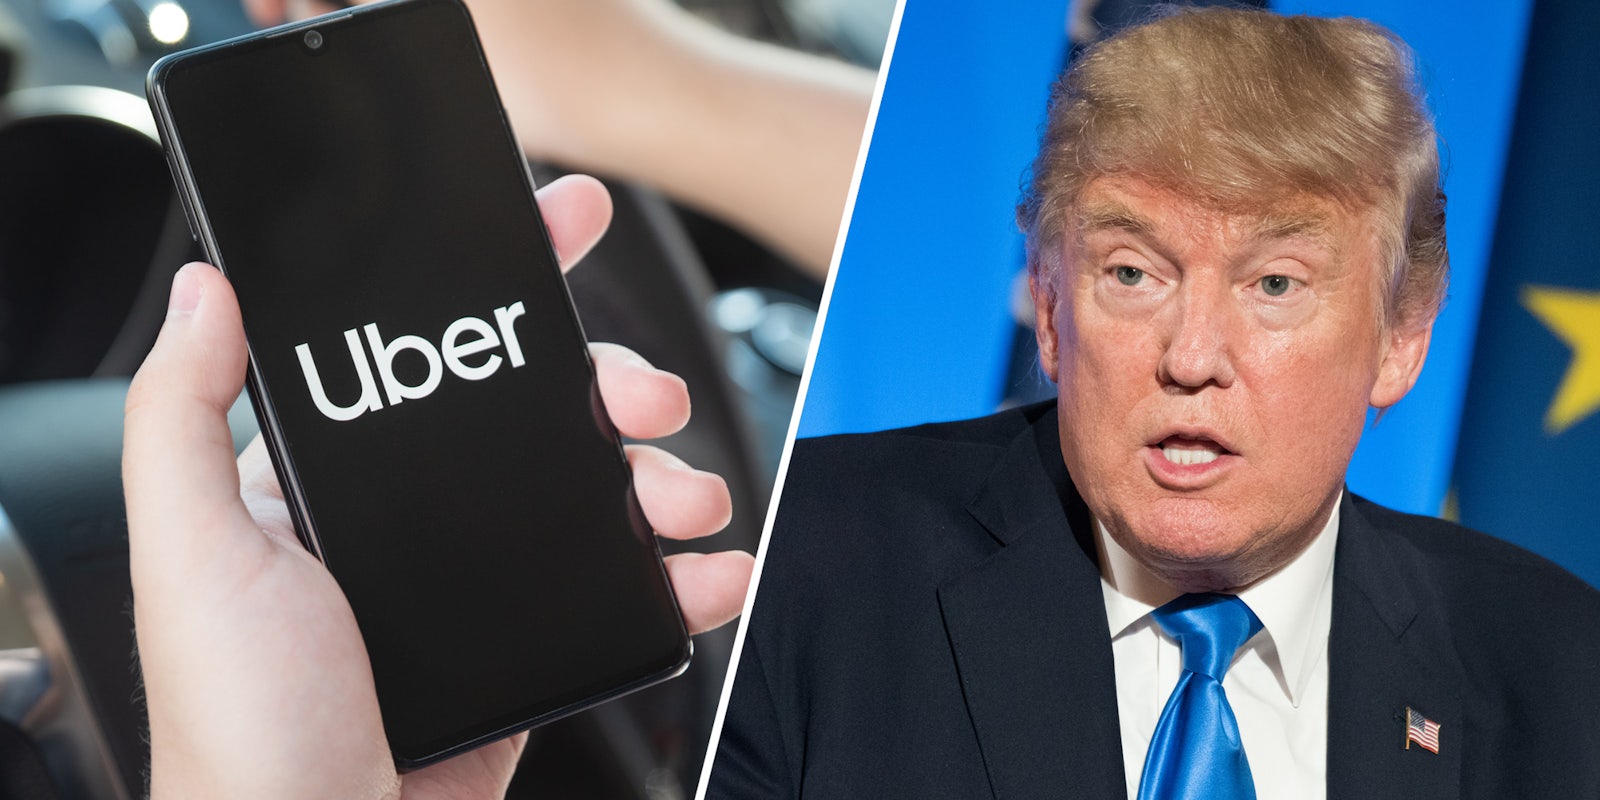 Hand holding phone with uber app(l), Donald Trump(r)